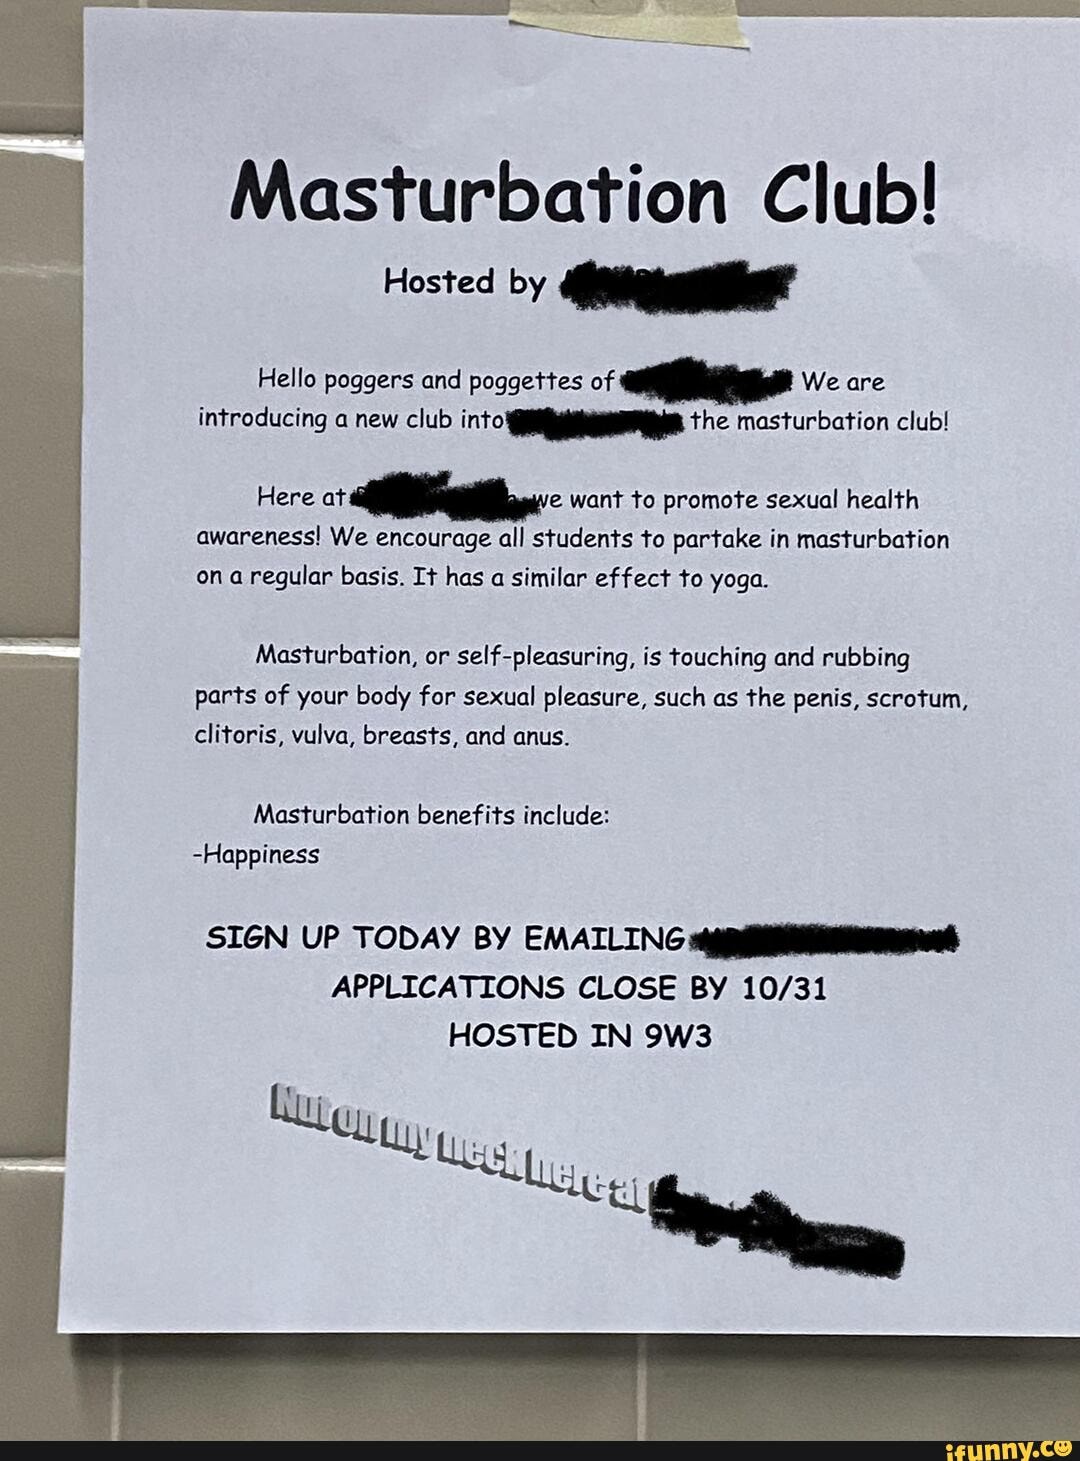 Masturbation Club! Hosted by Hello poggers and poggettes We are introducing  a new club into the